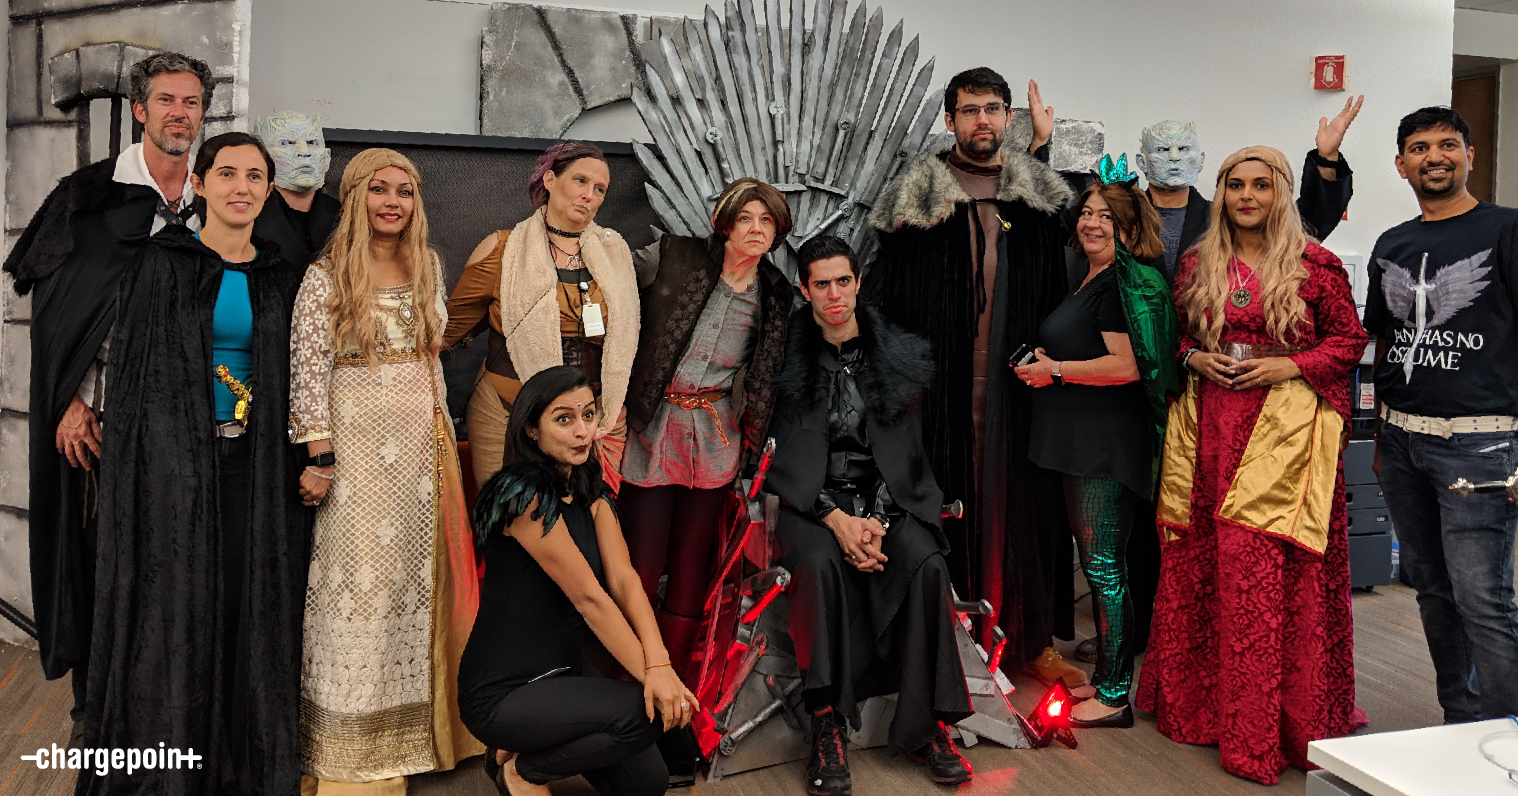 Engineering's Game of Thrones theme for the win!